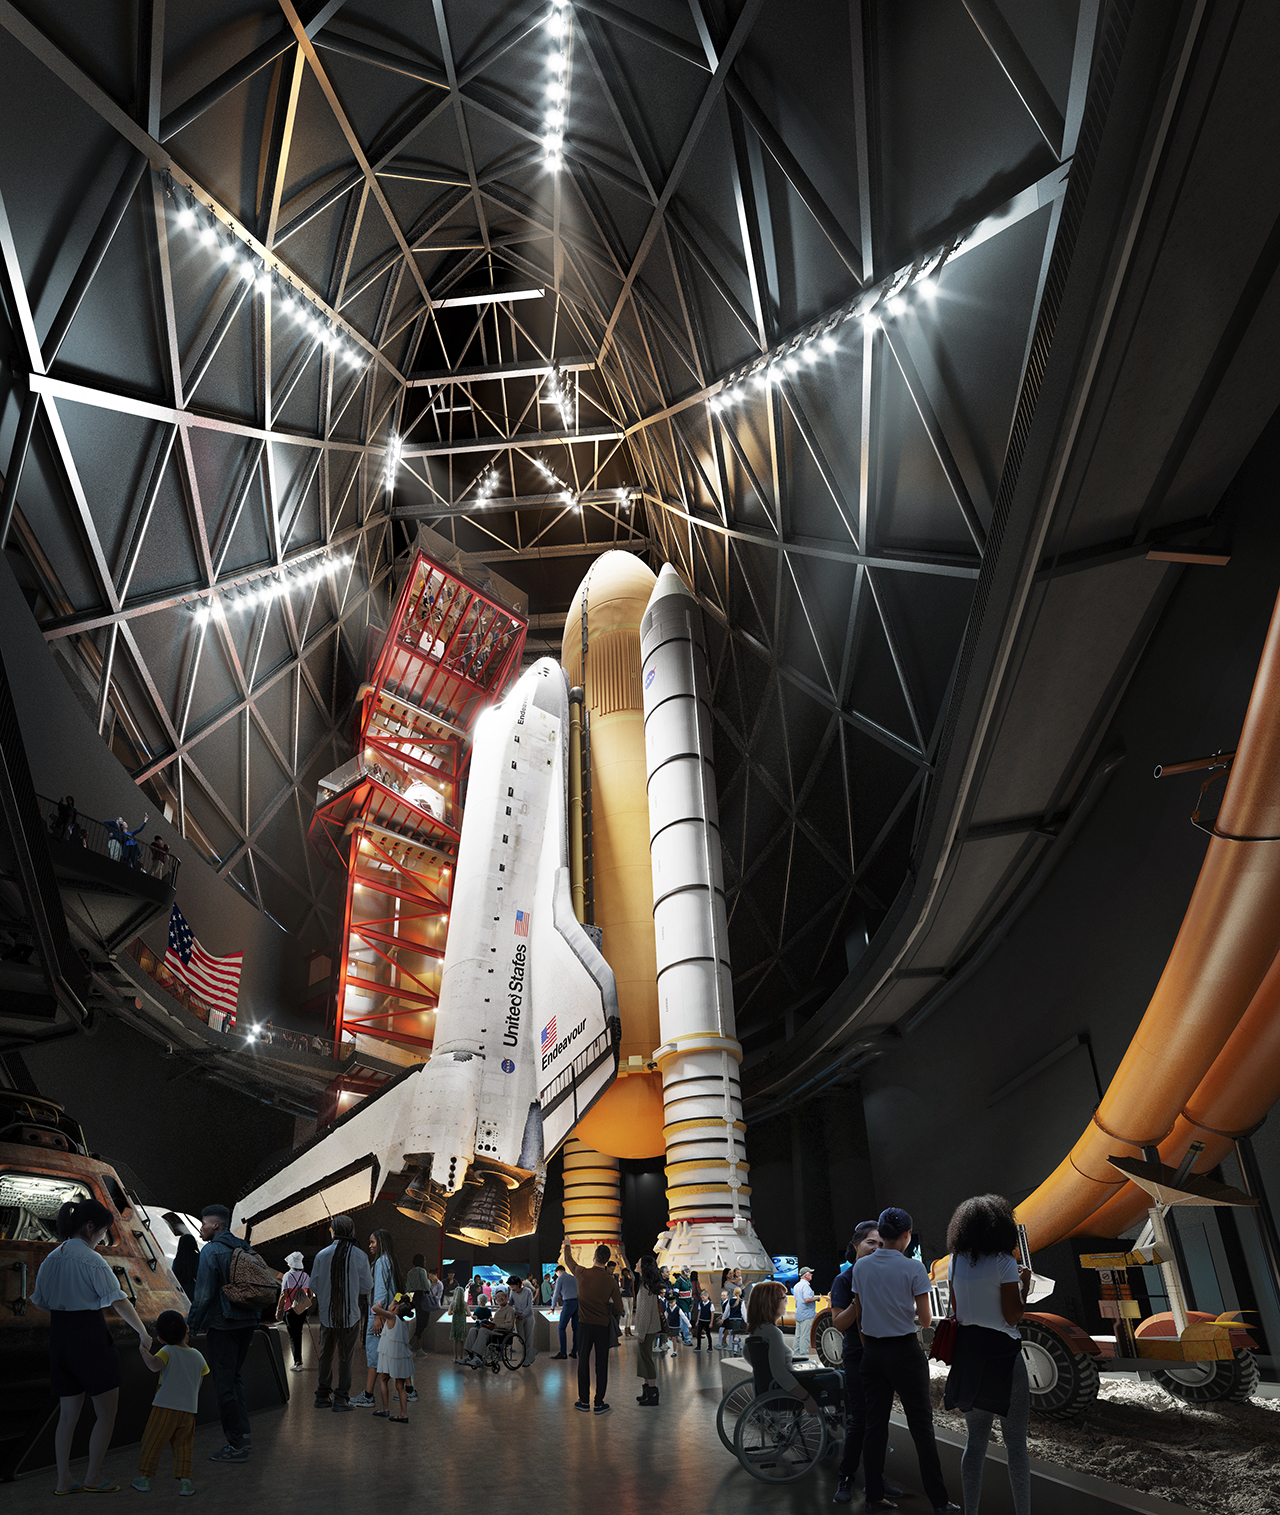 Artist's rendering the space shuttle Endeavour inside the Samuel Oschin Air and Space Center.